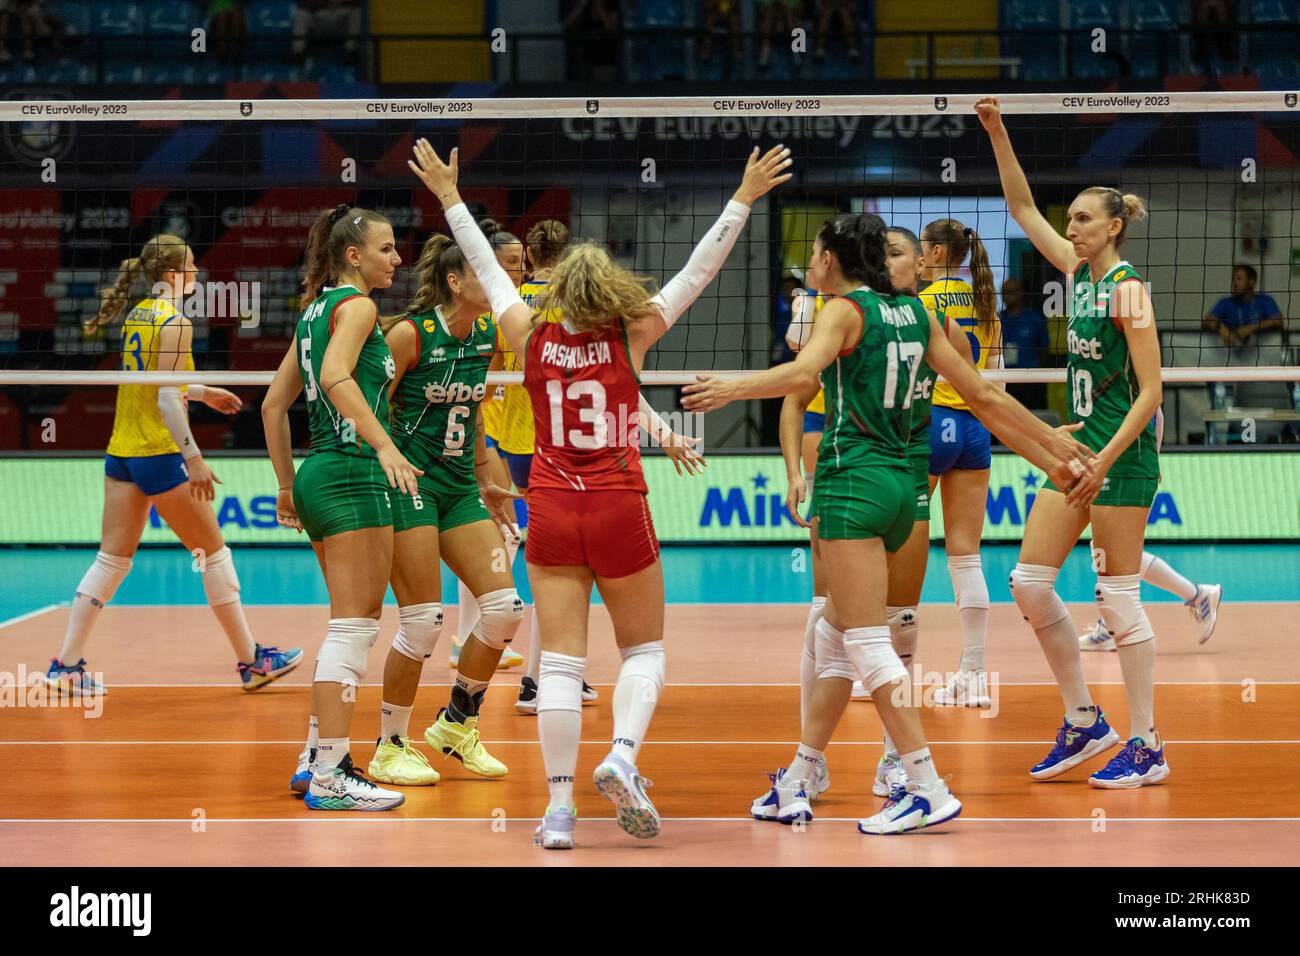 Monza, Italy. 17th Aug, 2023. Women - Bosnia & Herzegovina vs Bulgaria, Volleyball Intenationals in Monza, Italy, August 17 2023 Credit: Independent Photo Agency/Alamy Live News Stock Photo